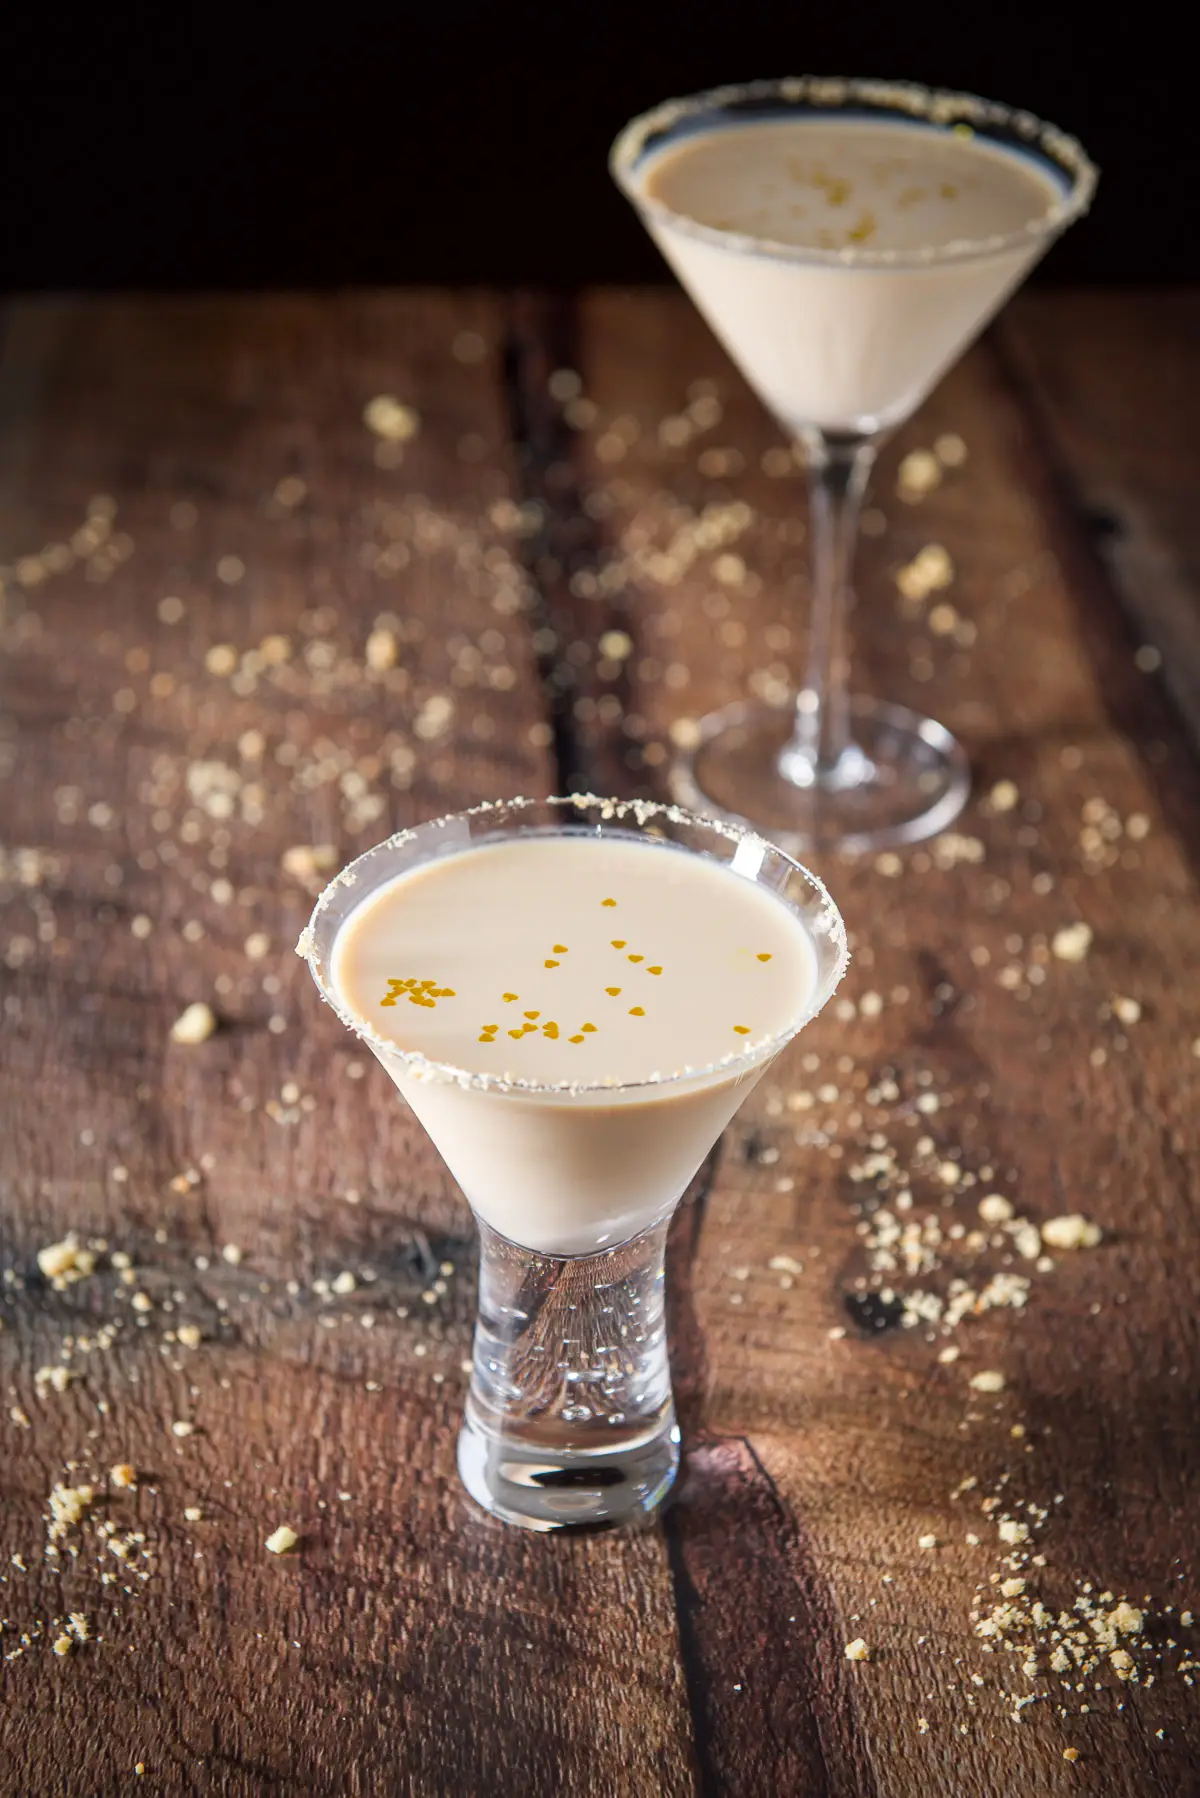 A short bubble glass with the cream drink with gold hearts floating in it. There is another glass and cookie crumbs on the table